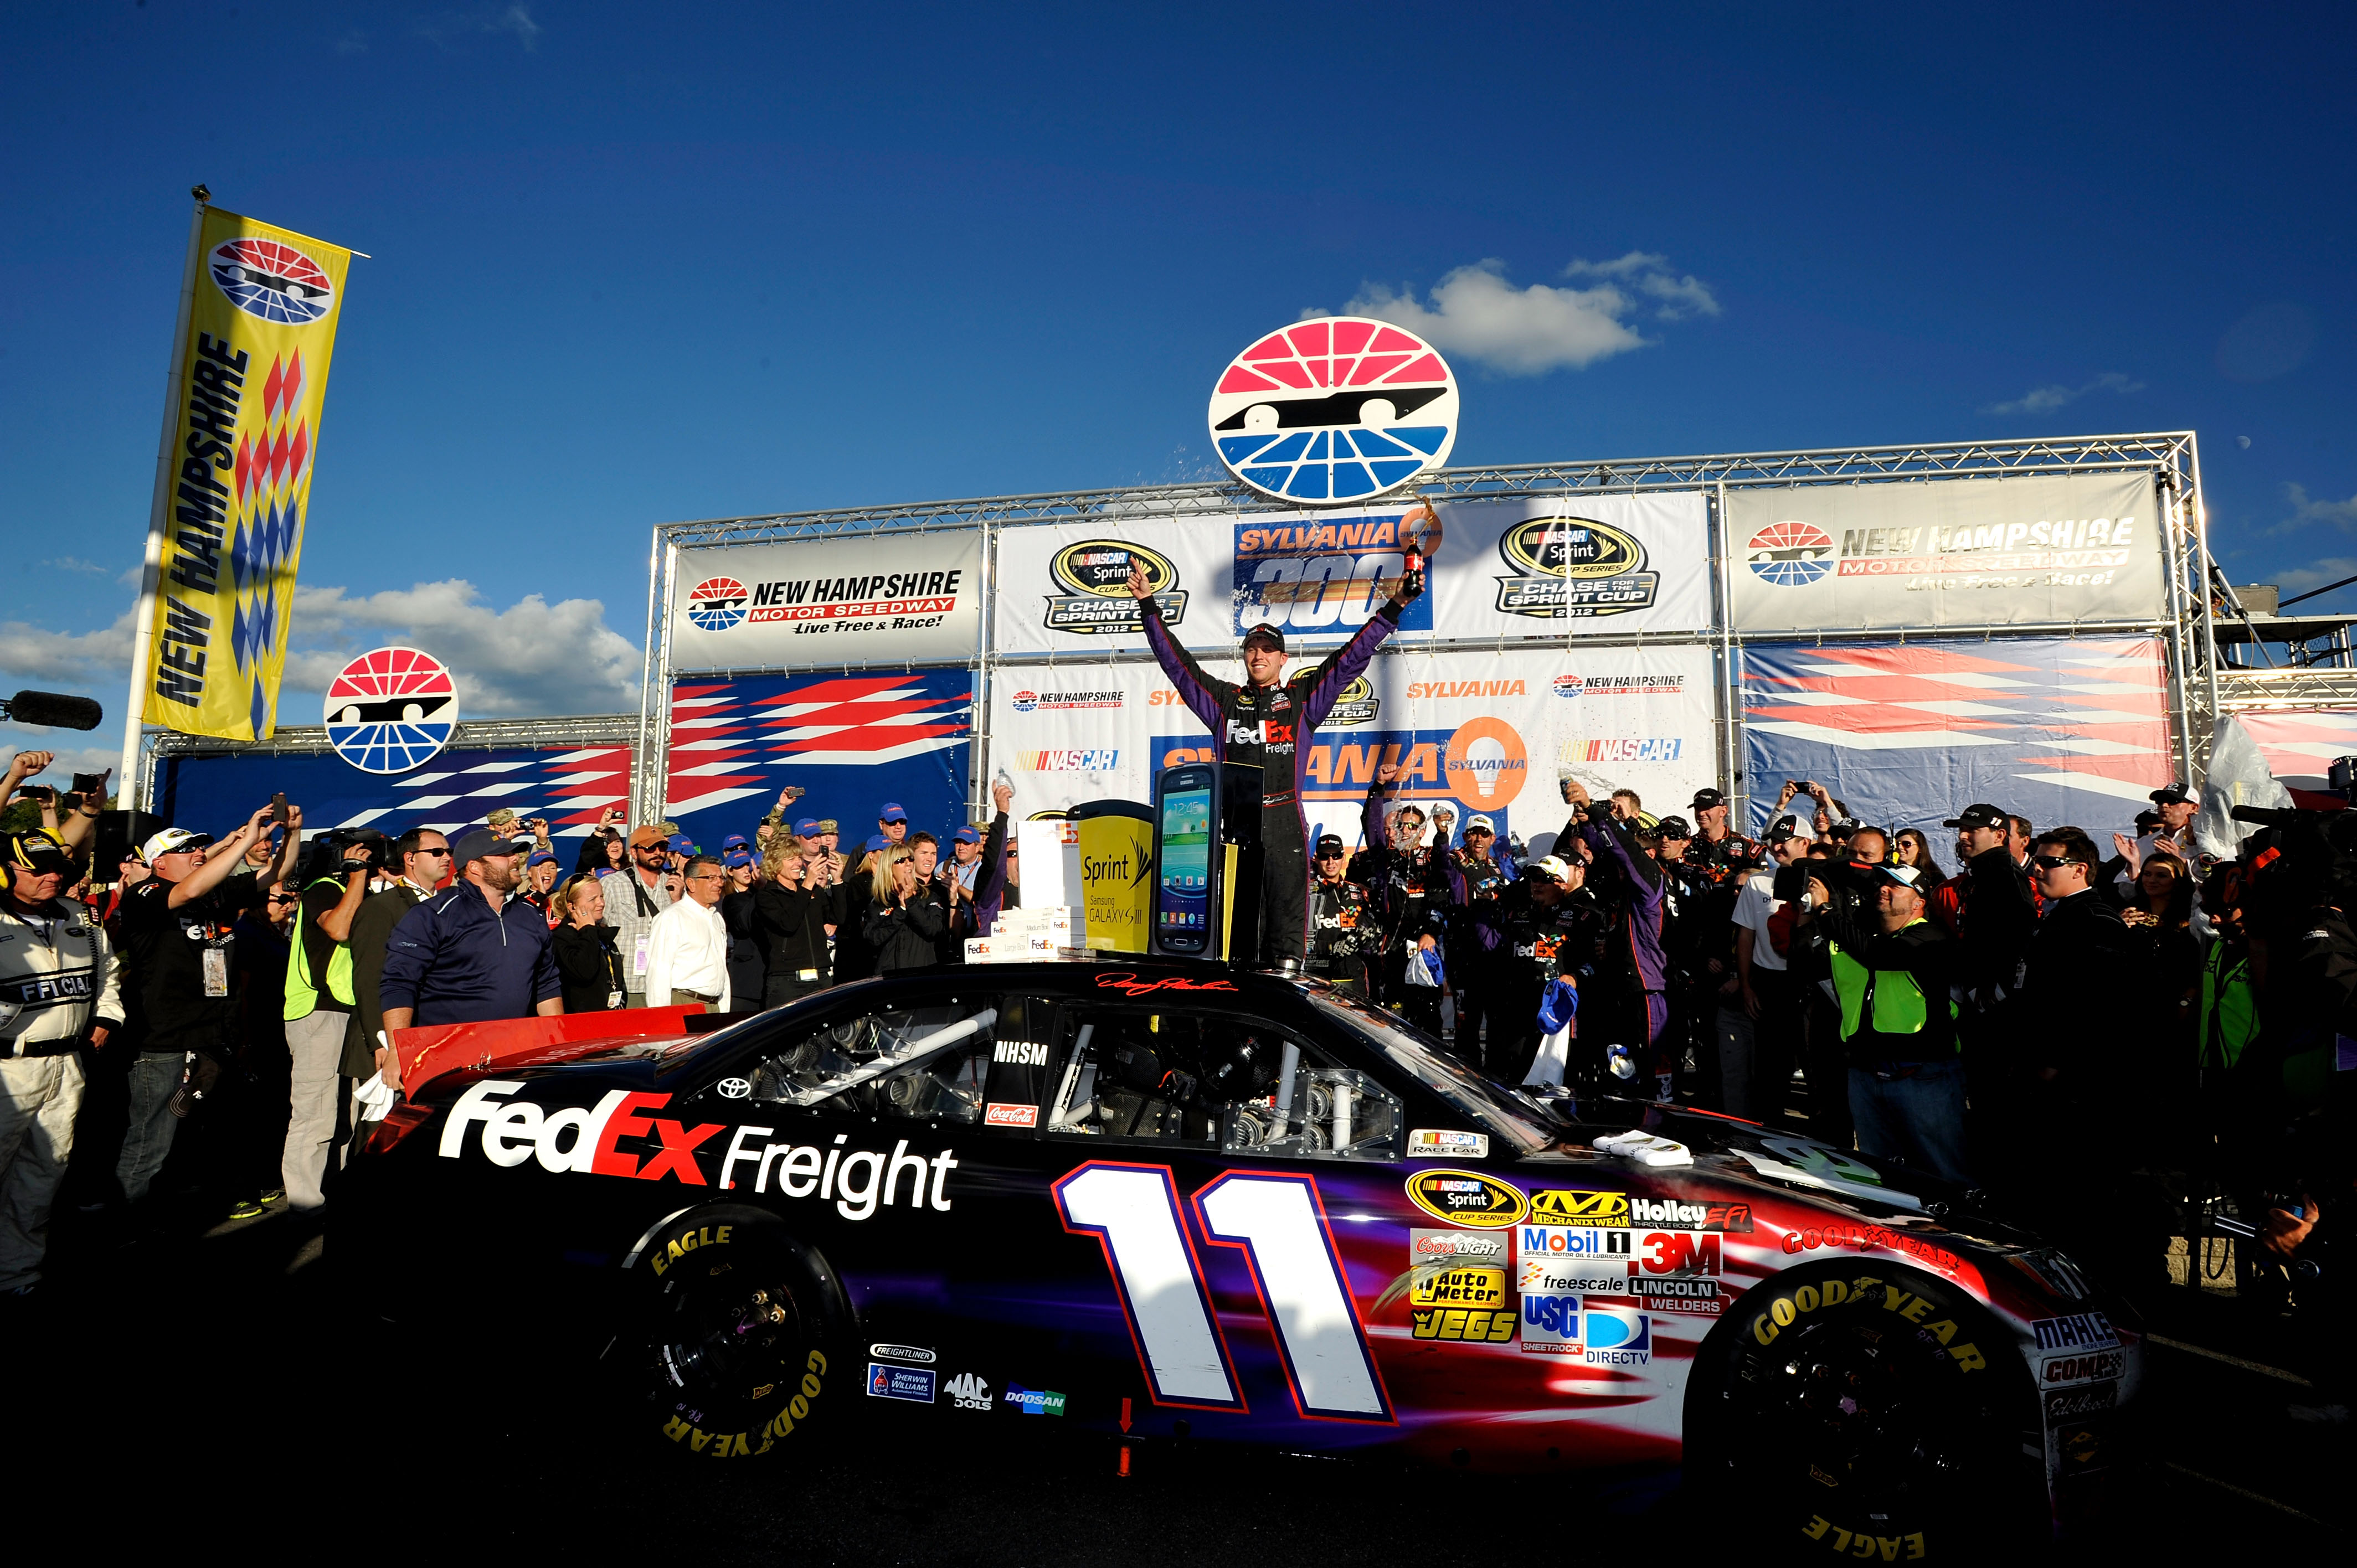 Hamlin called his shot via Twitter that he would win Sunday's race at New Hampshire.  He not only backed up that statement, he dominated the entire race to get the victory.